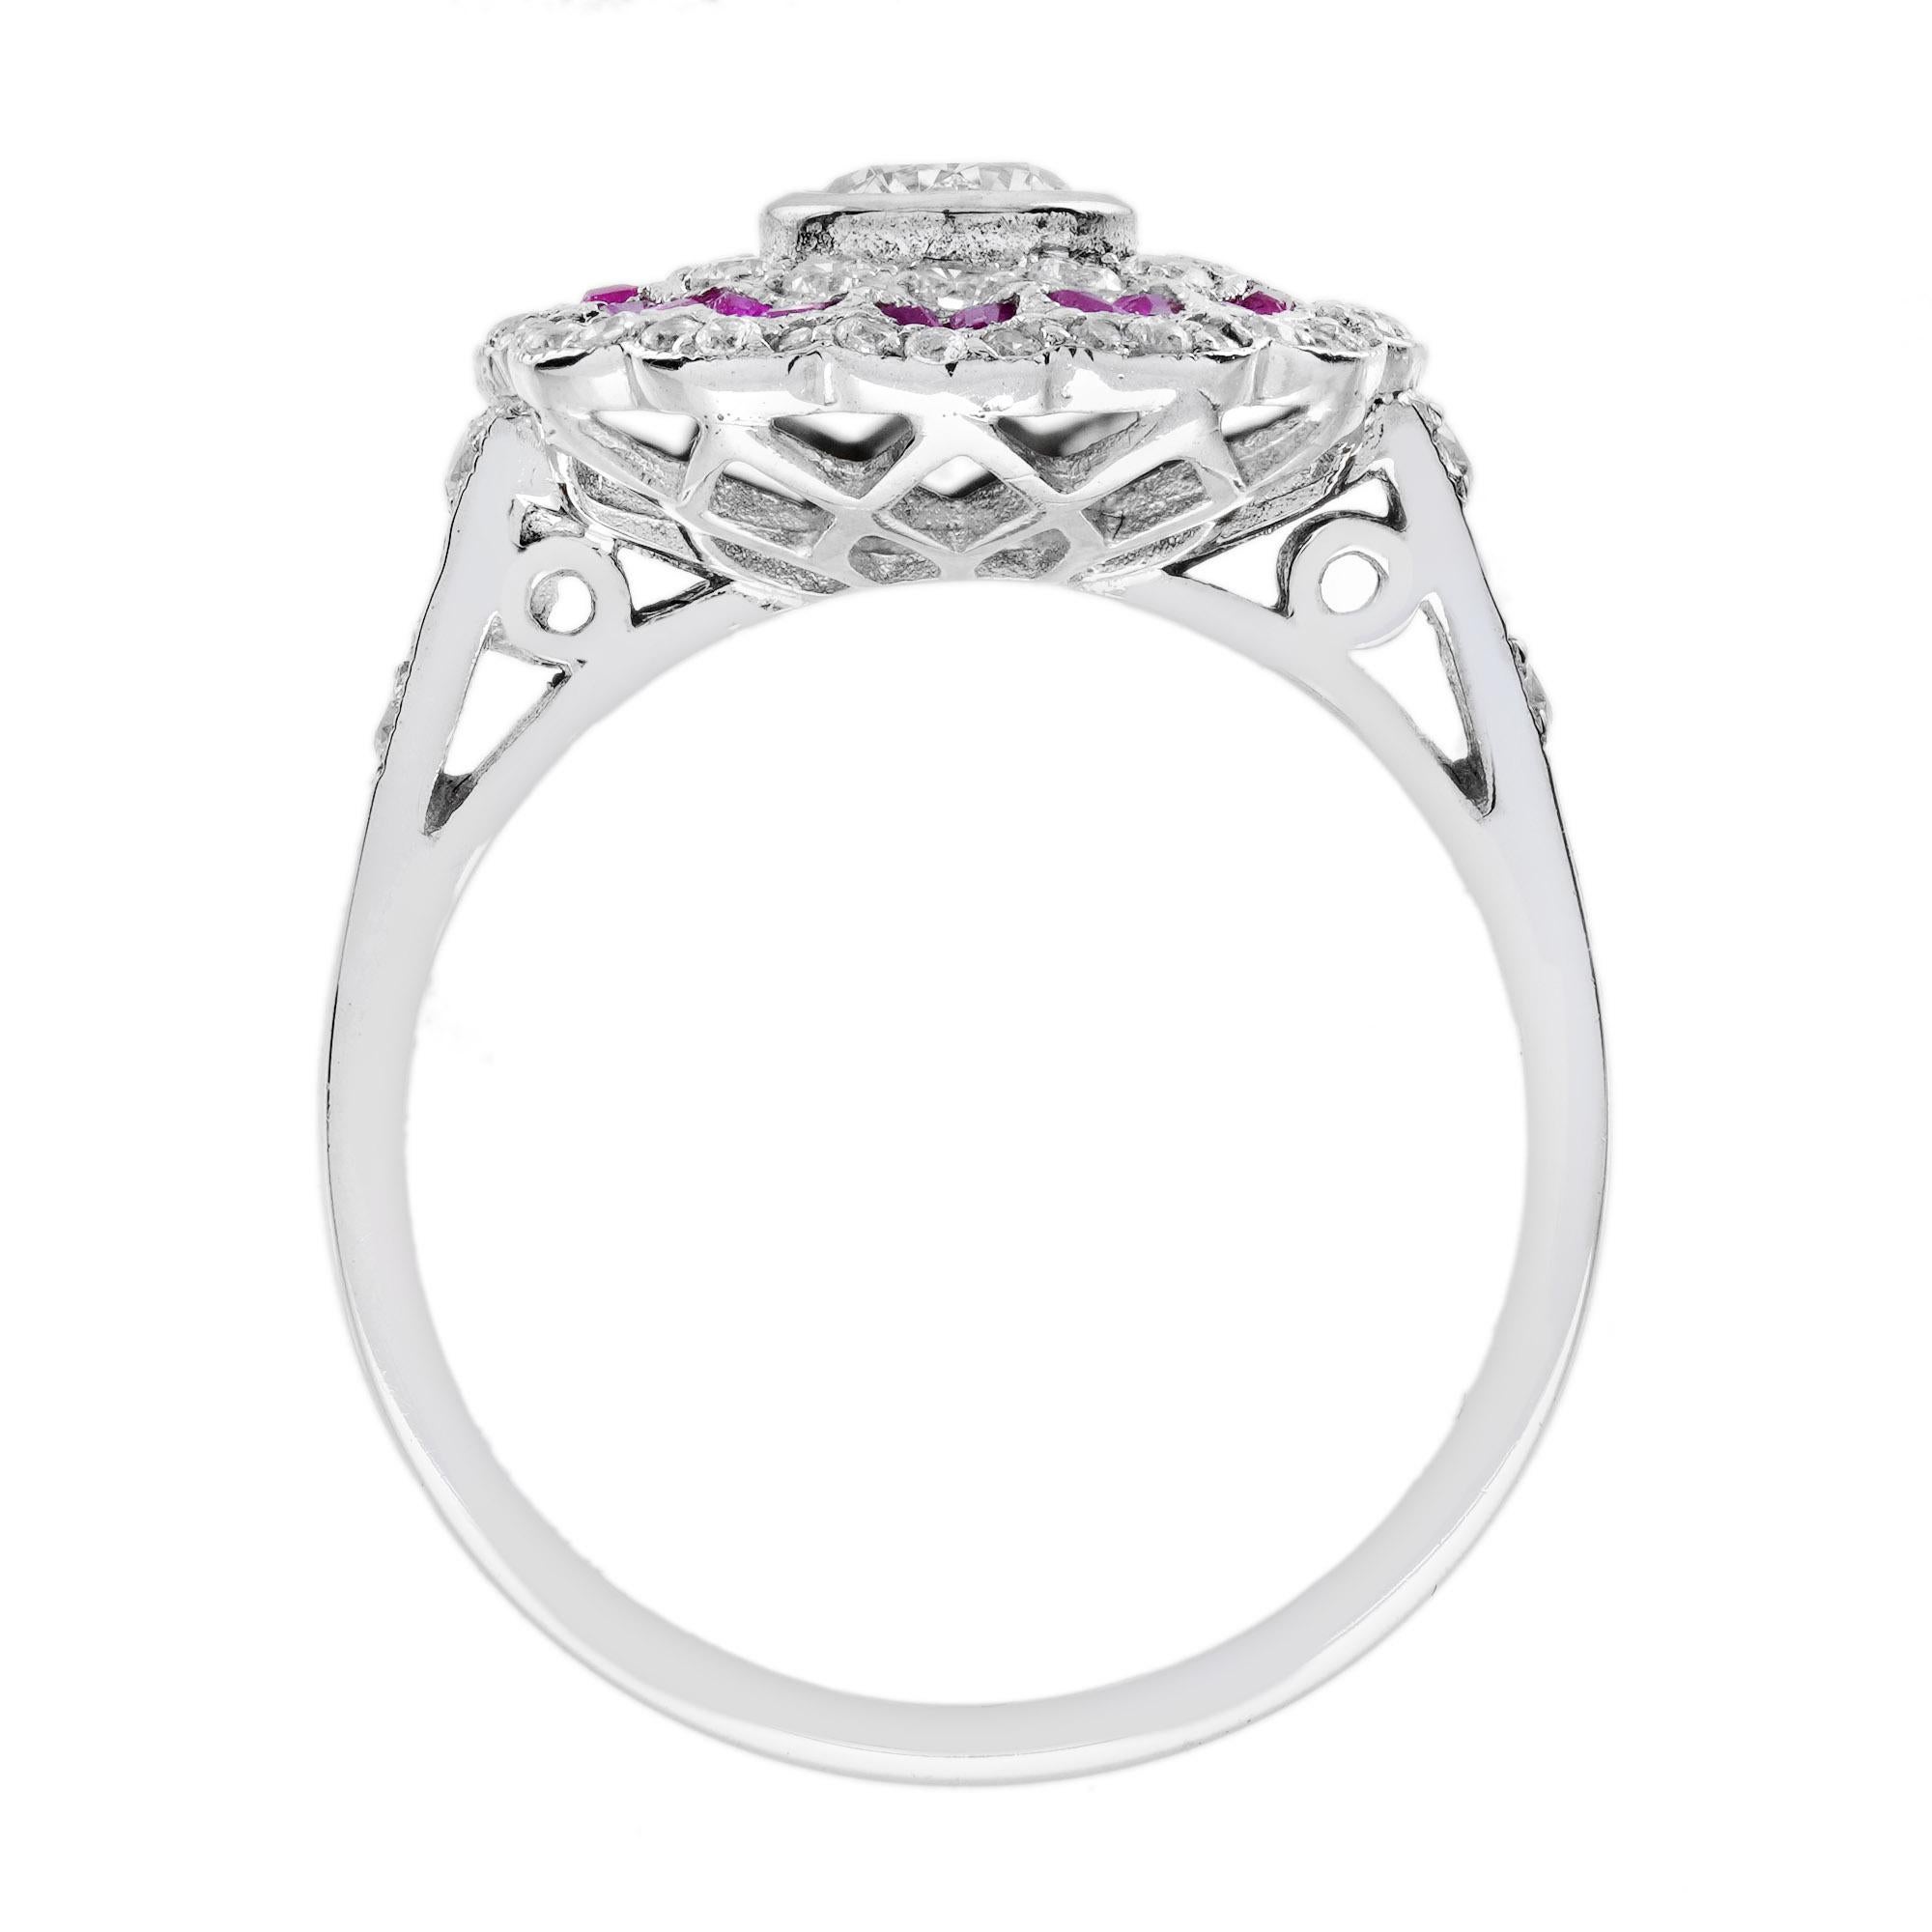 Diamond and Ruby Art Deco Style Floral Engagement Ring in 18K White Gold For Sale 1